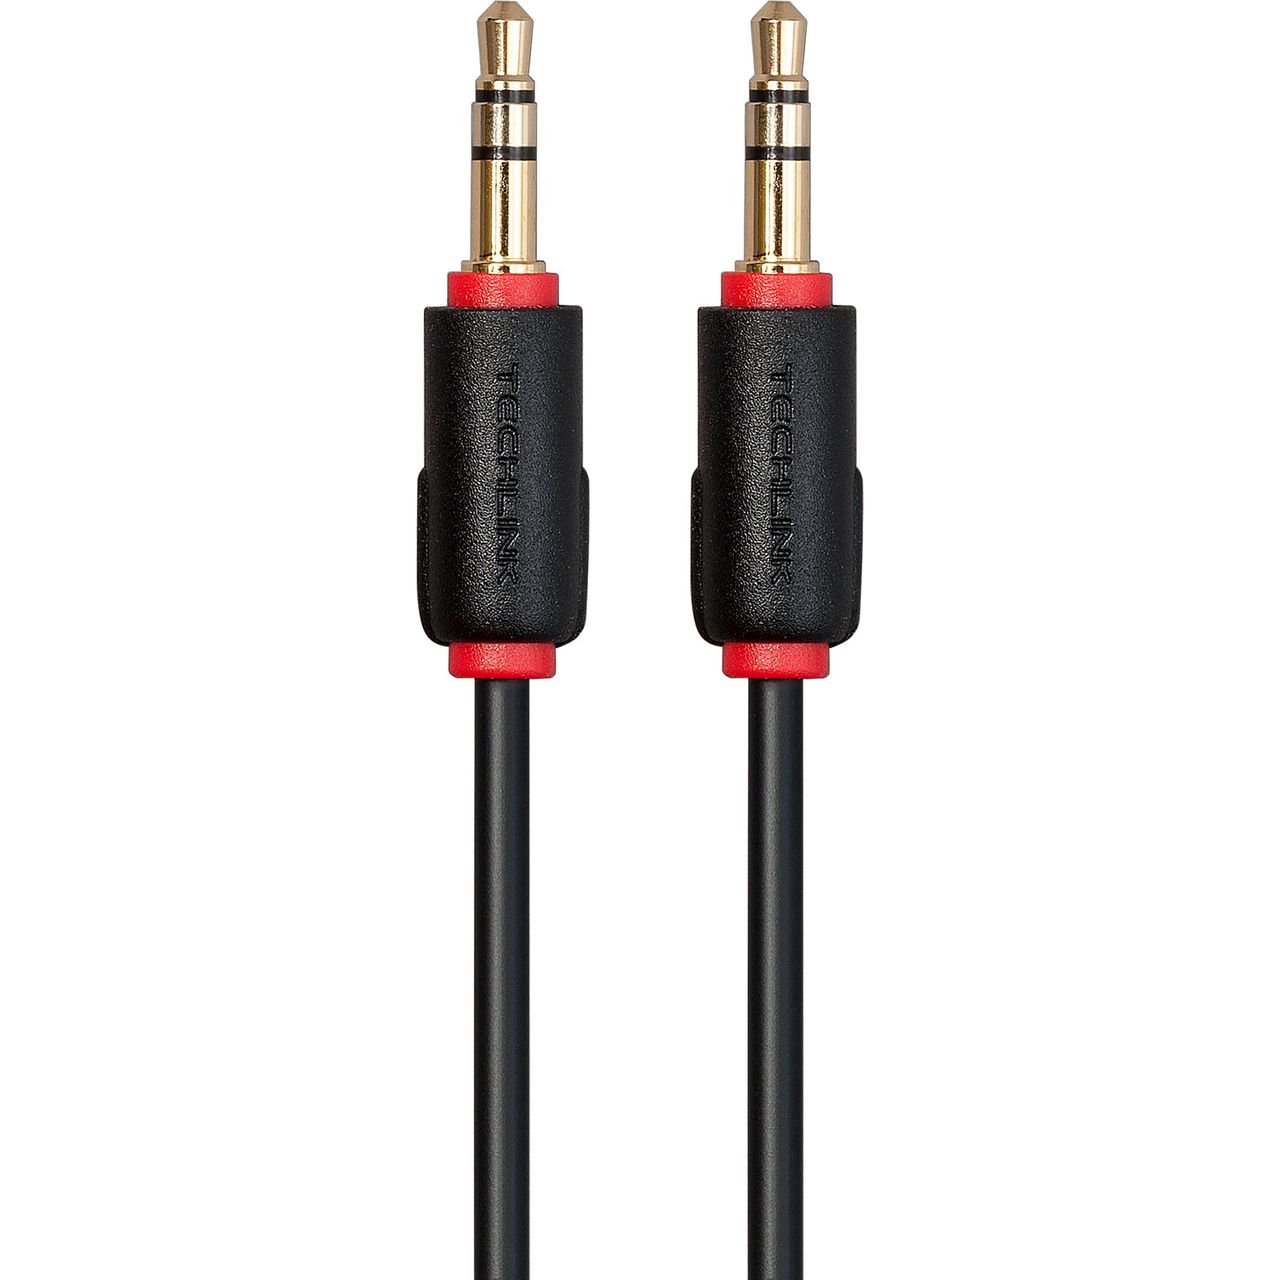 Techlink 103263 3m 3.5mm Stereo Cable Review